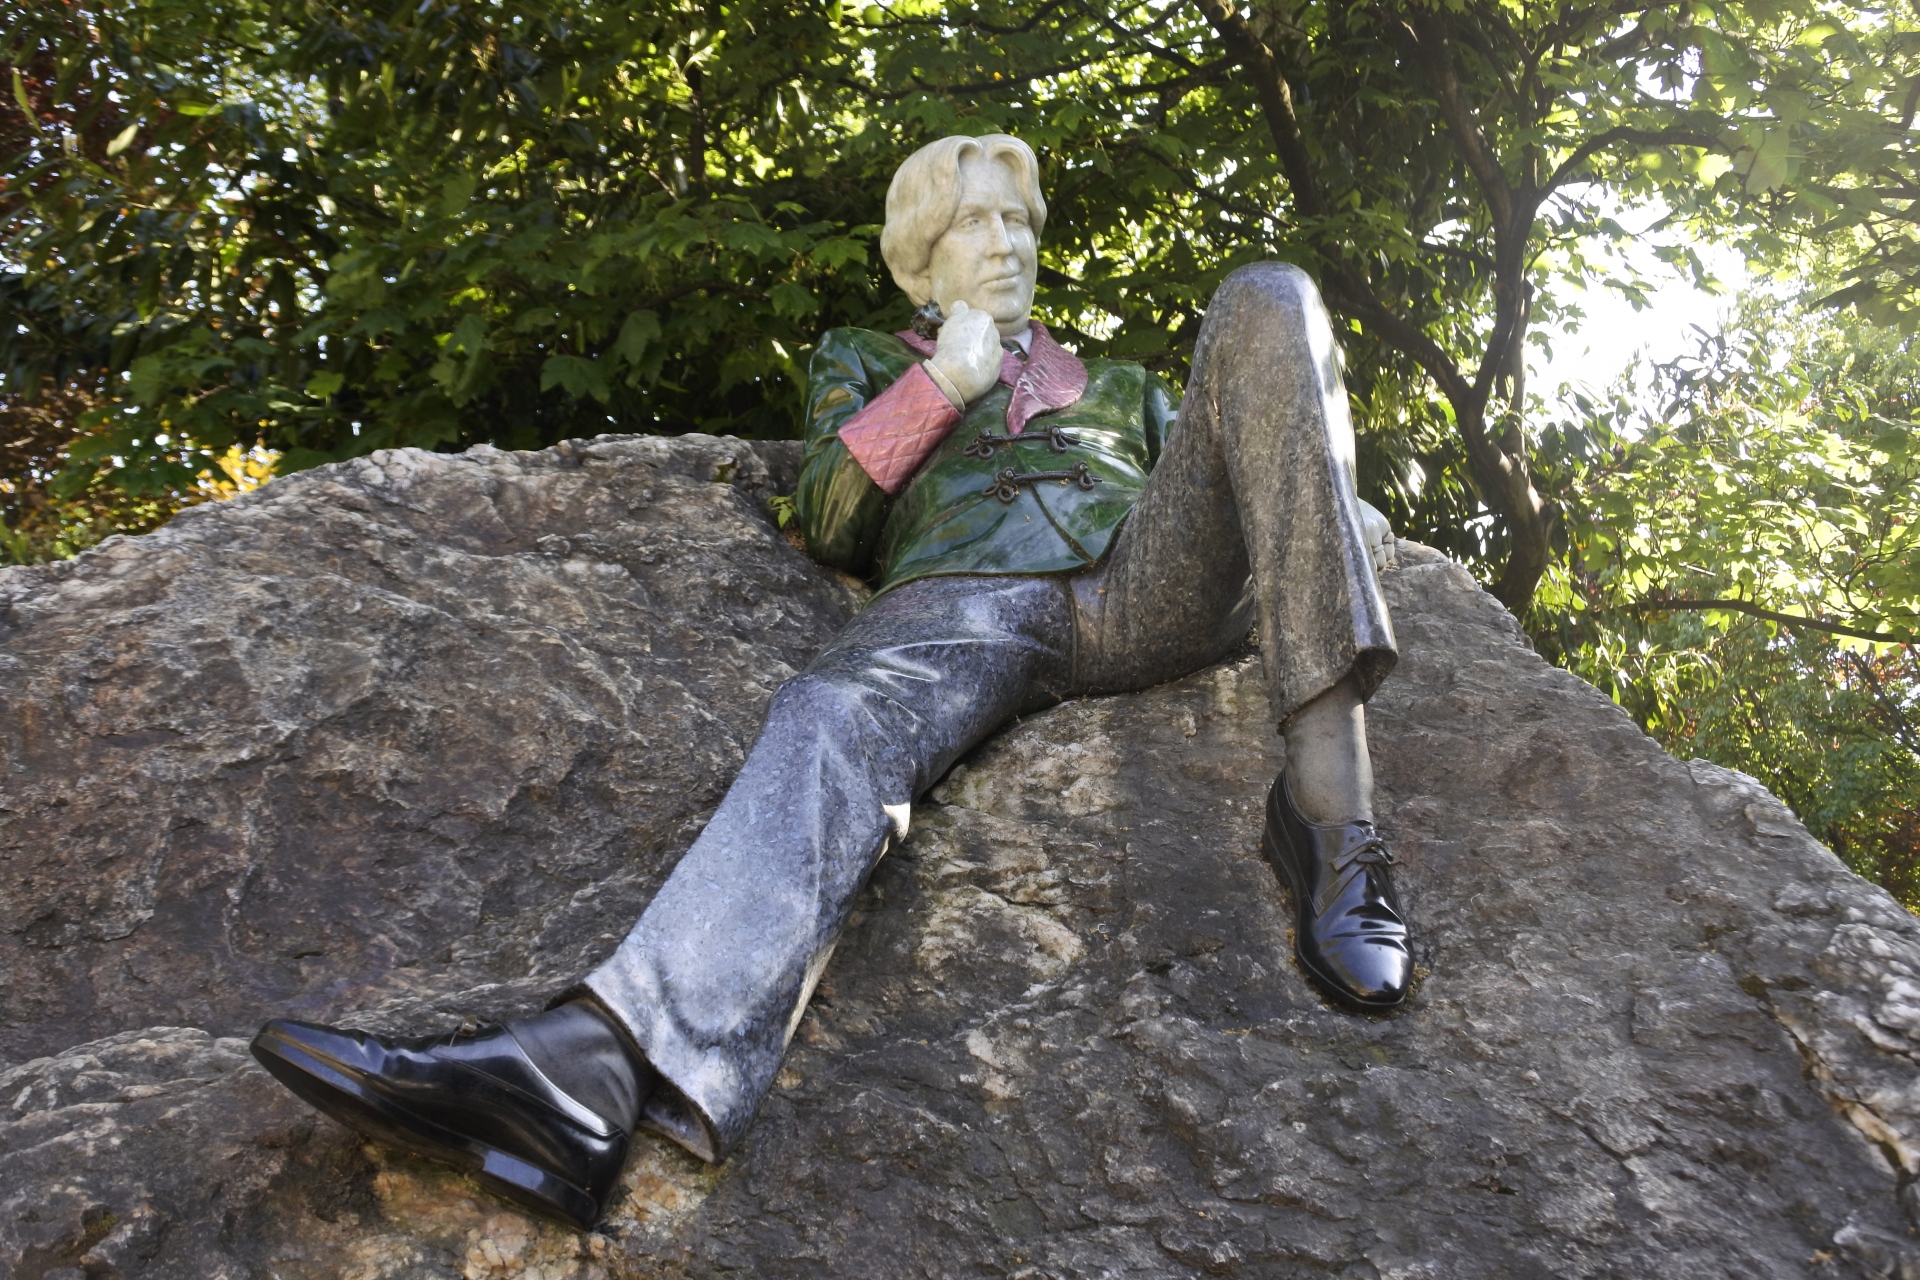 The statue of Oscar Wilde in the Merrion Square Park